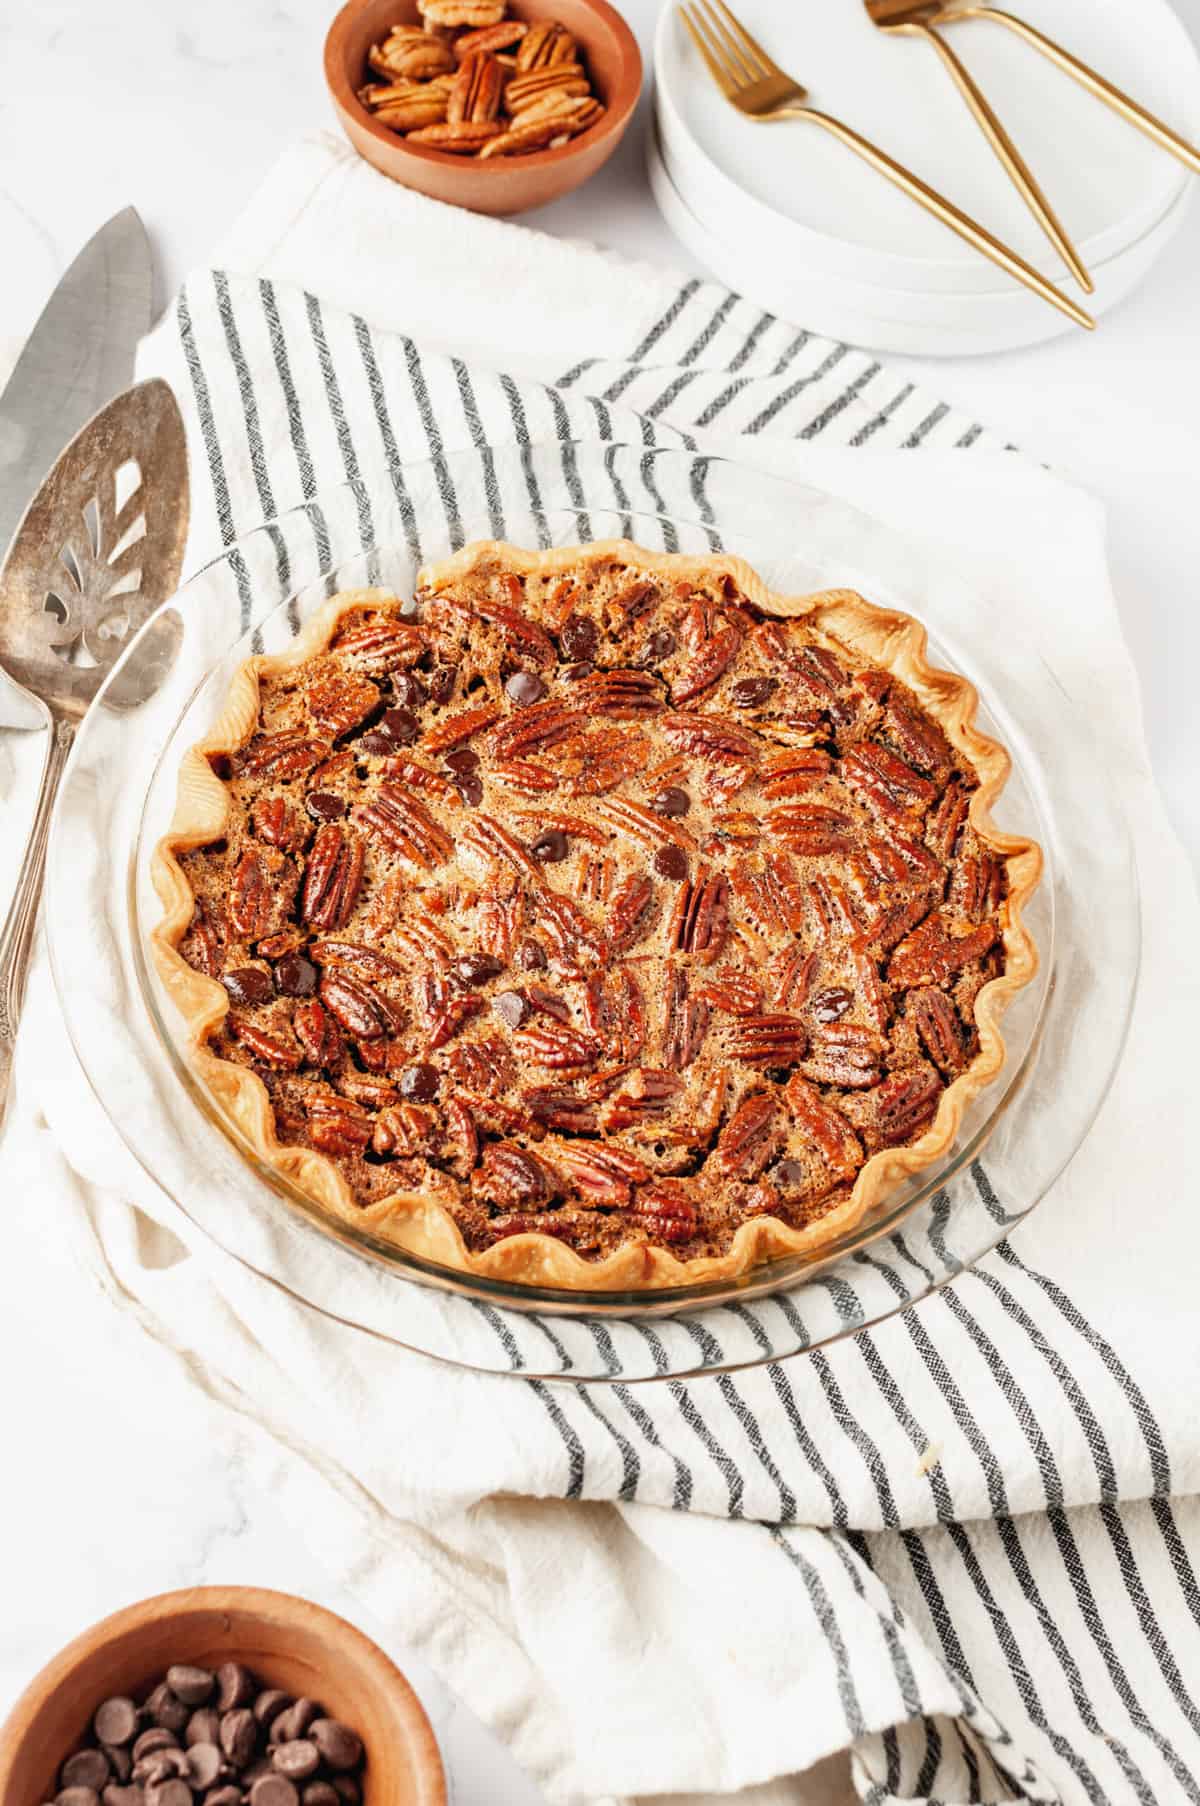 Top down image of a finished baked chocolate pecan pie served in a clear pie dish, striped kitchen cloth, silver server, small bowl of pecans, white serving plates and forks in the background.